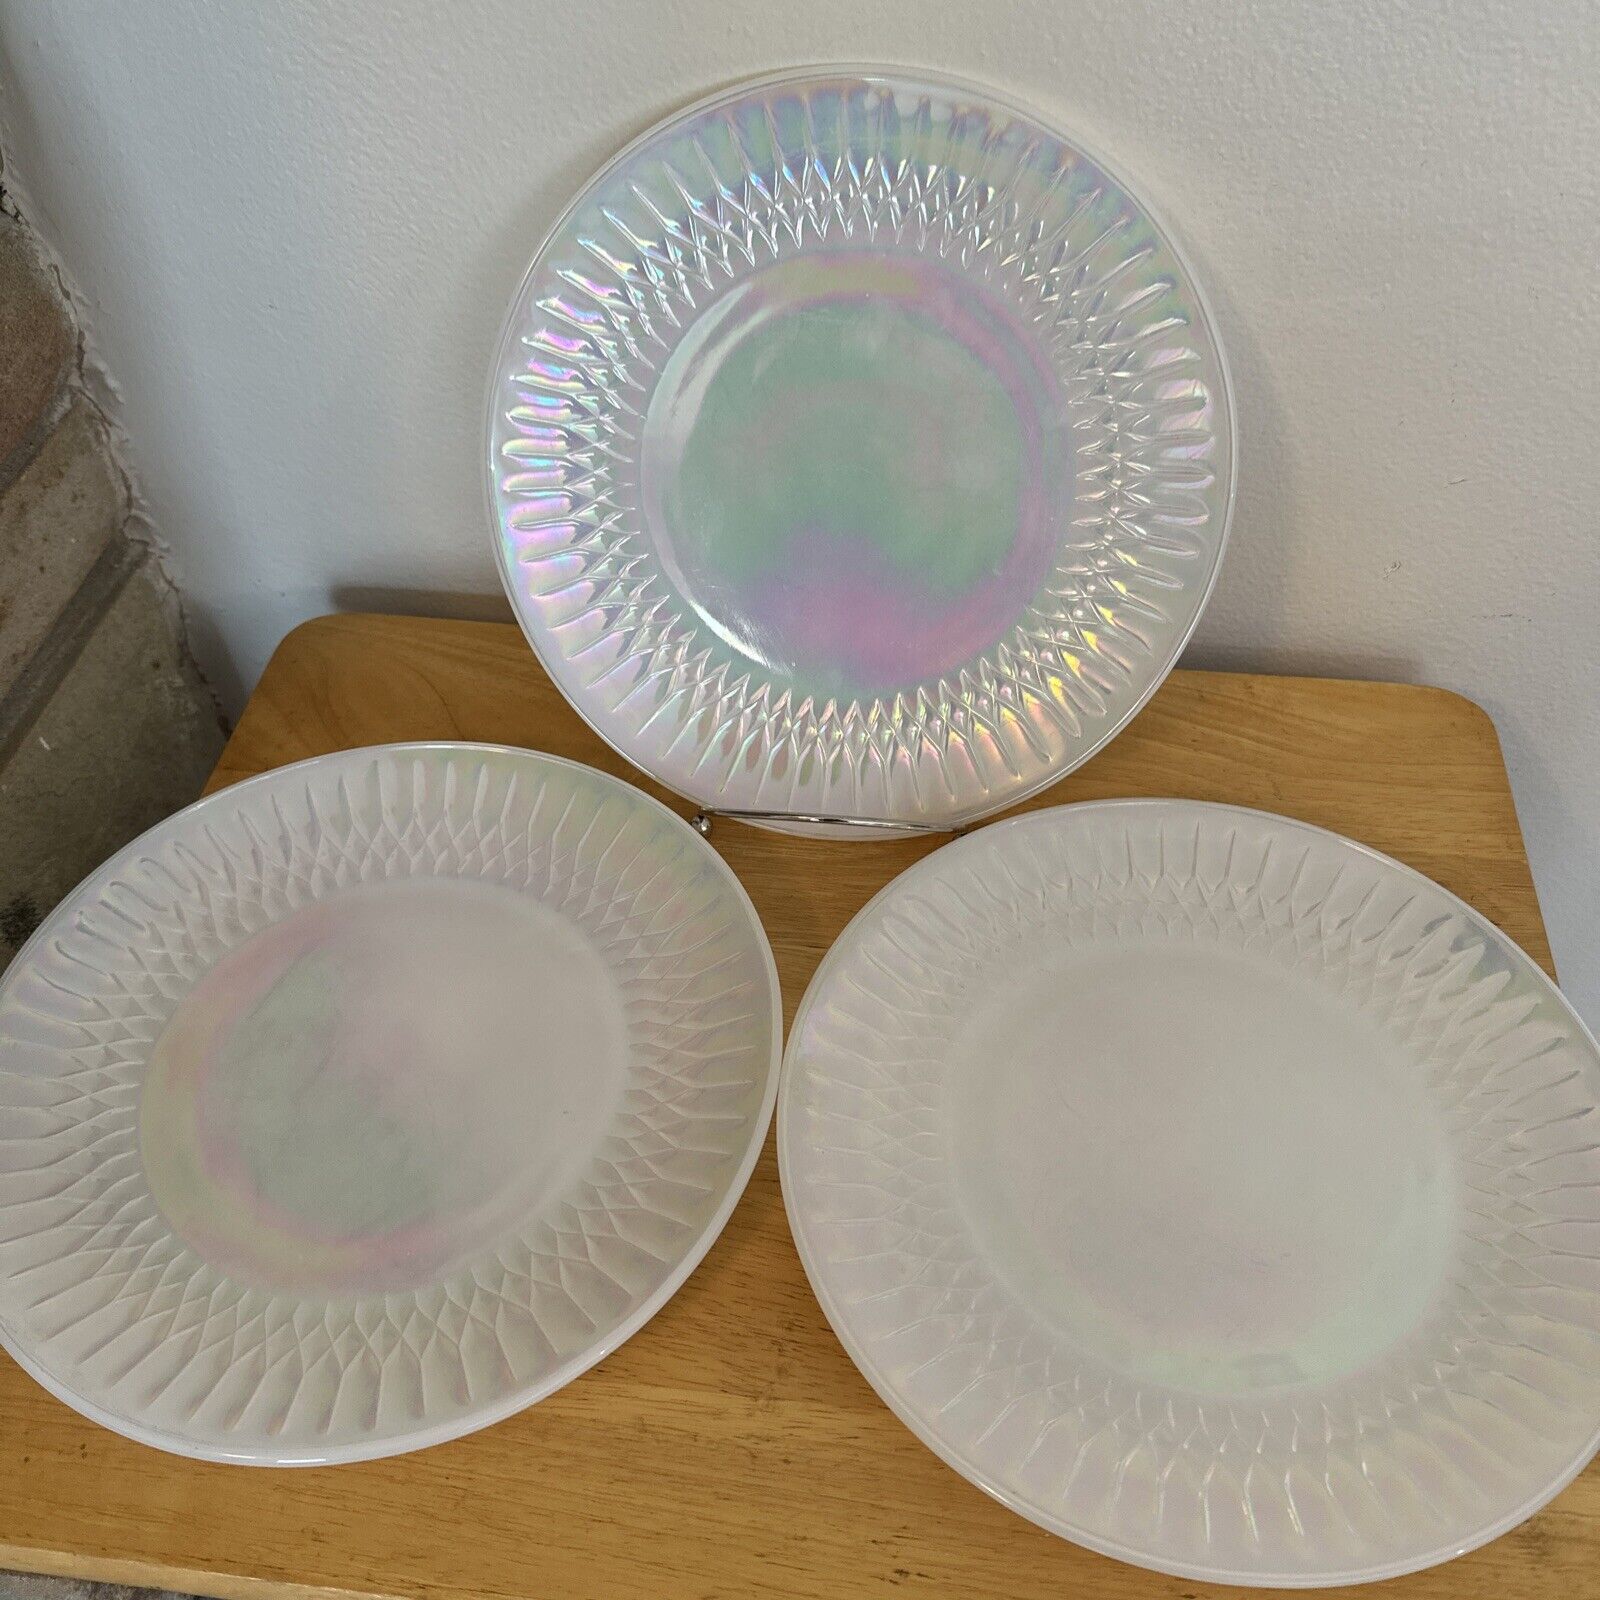 3 Federal Glass AURORA Borealis Heat Proof 10” Dinner Plates Rare Hard to Find